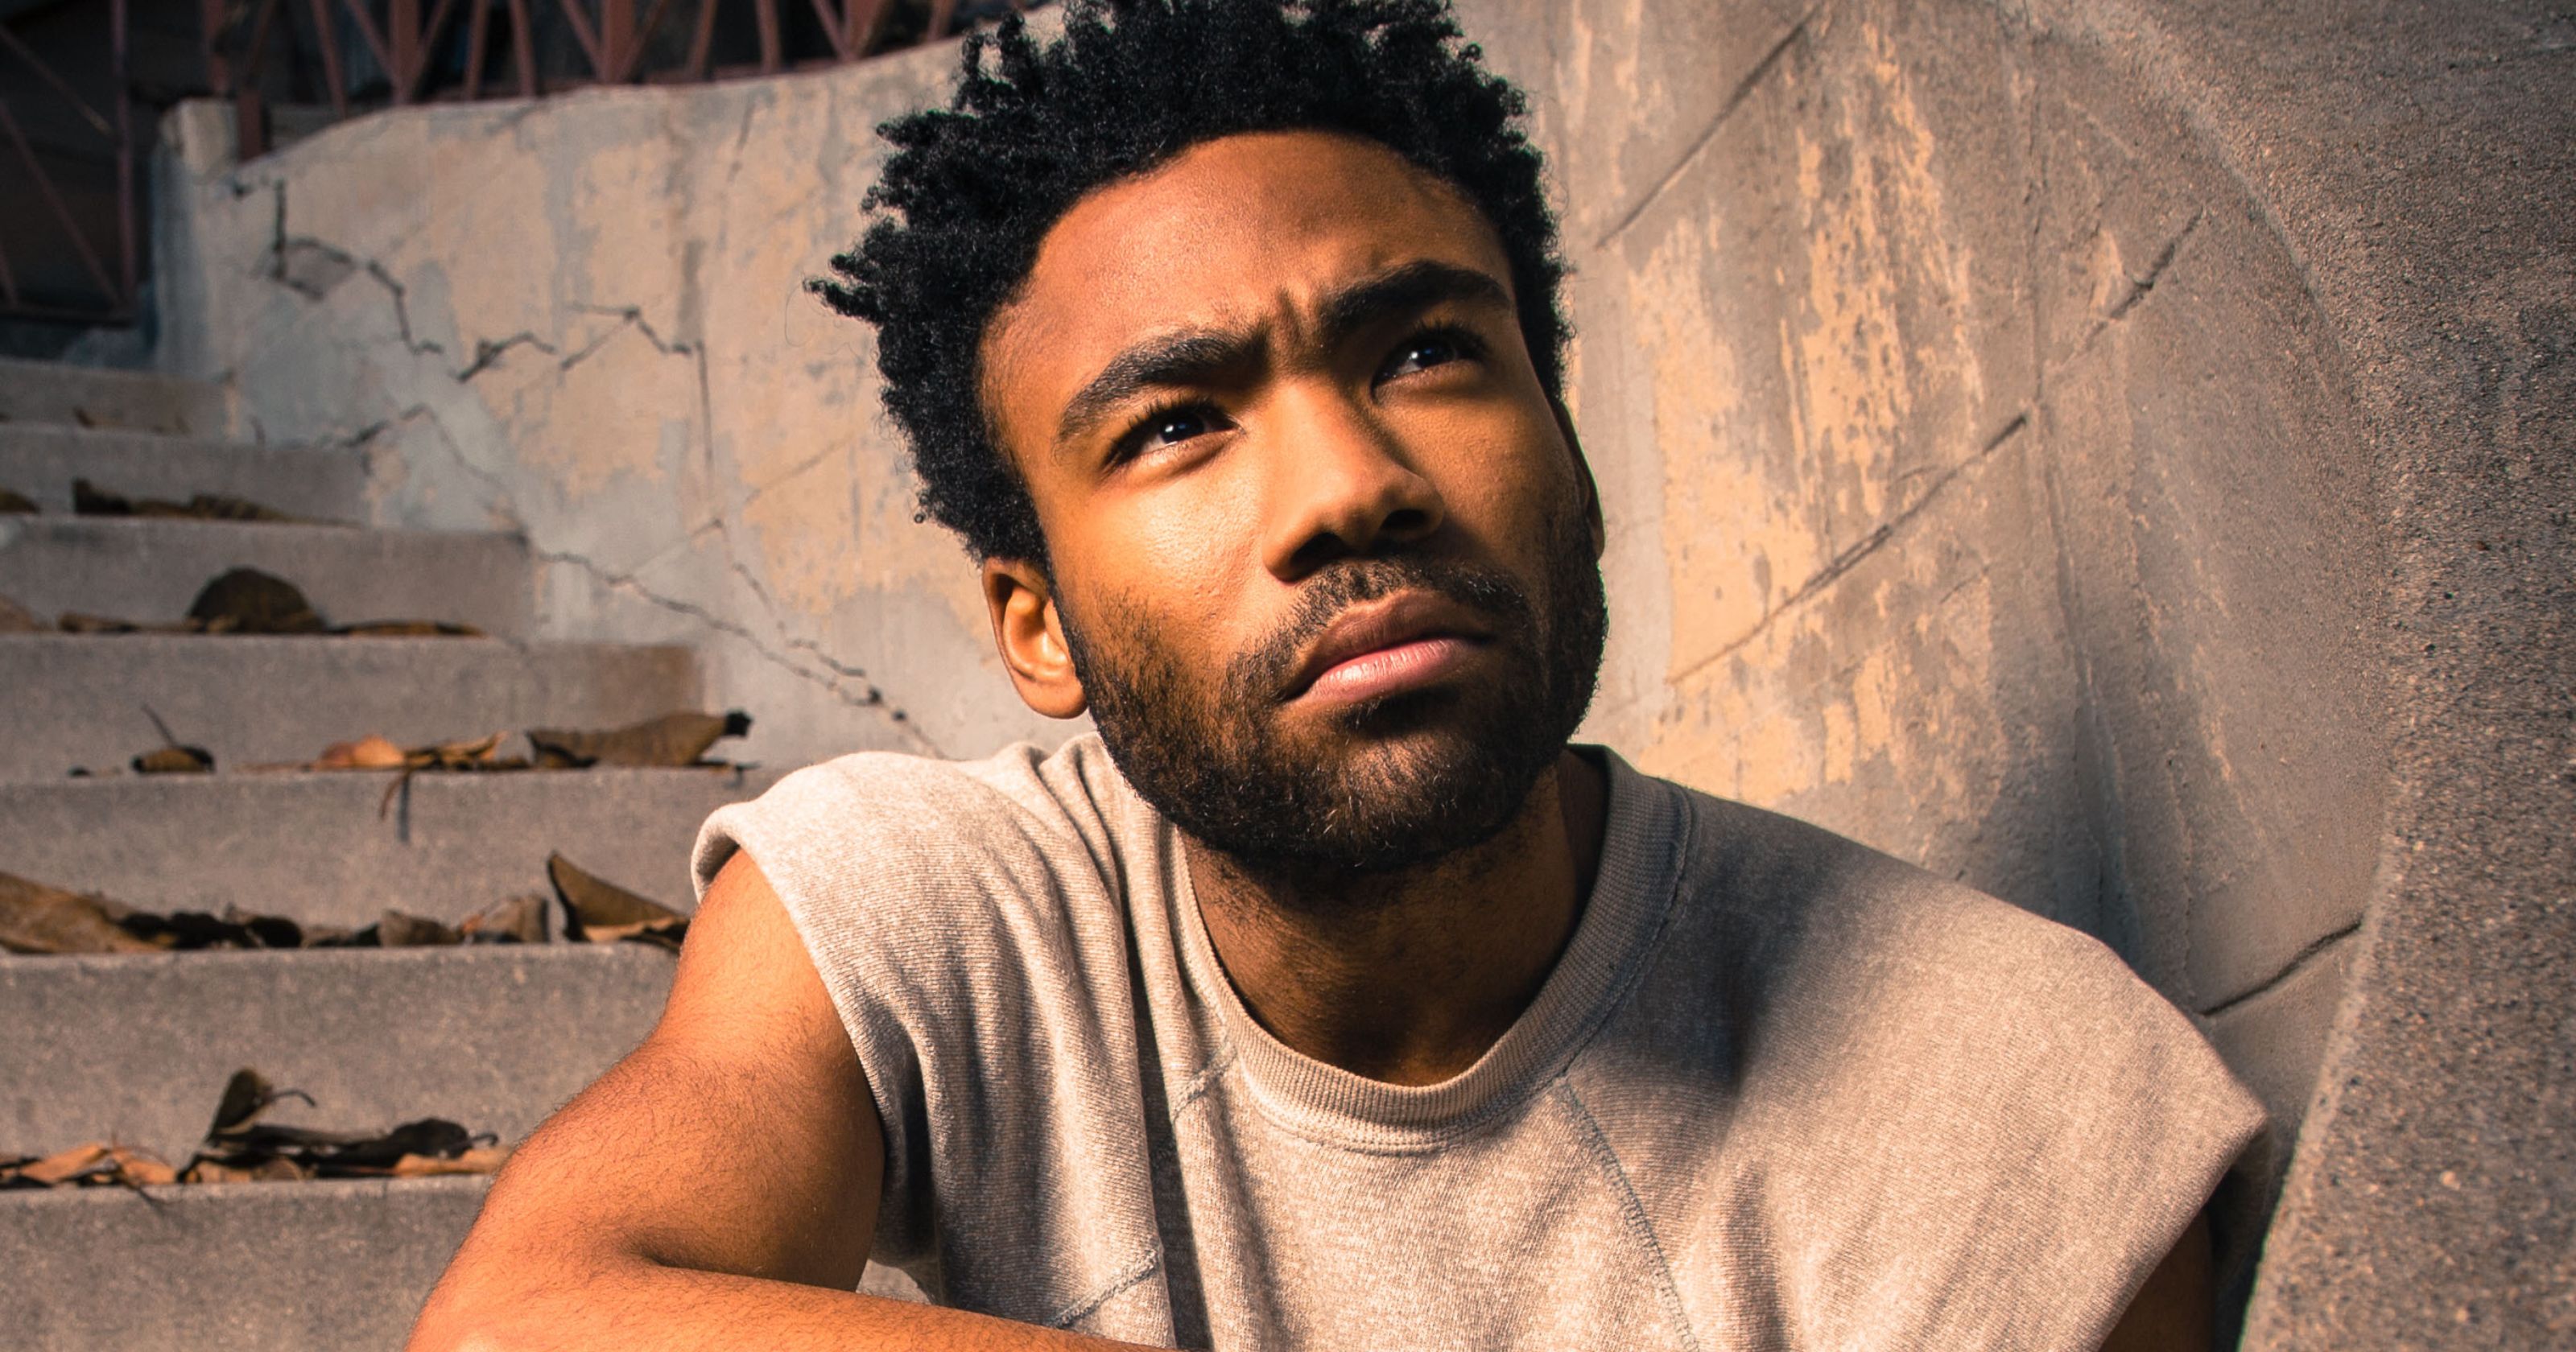 Childish Gambino This Is America Music Video CONVERSATIONS ABOUT HER